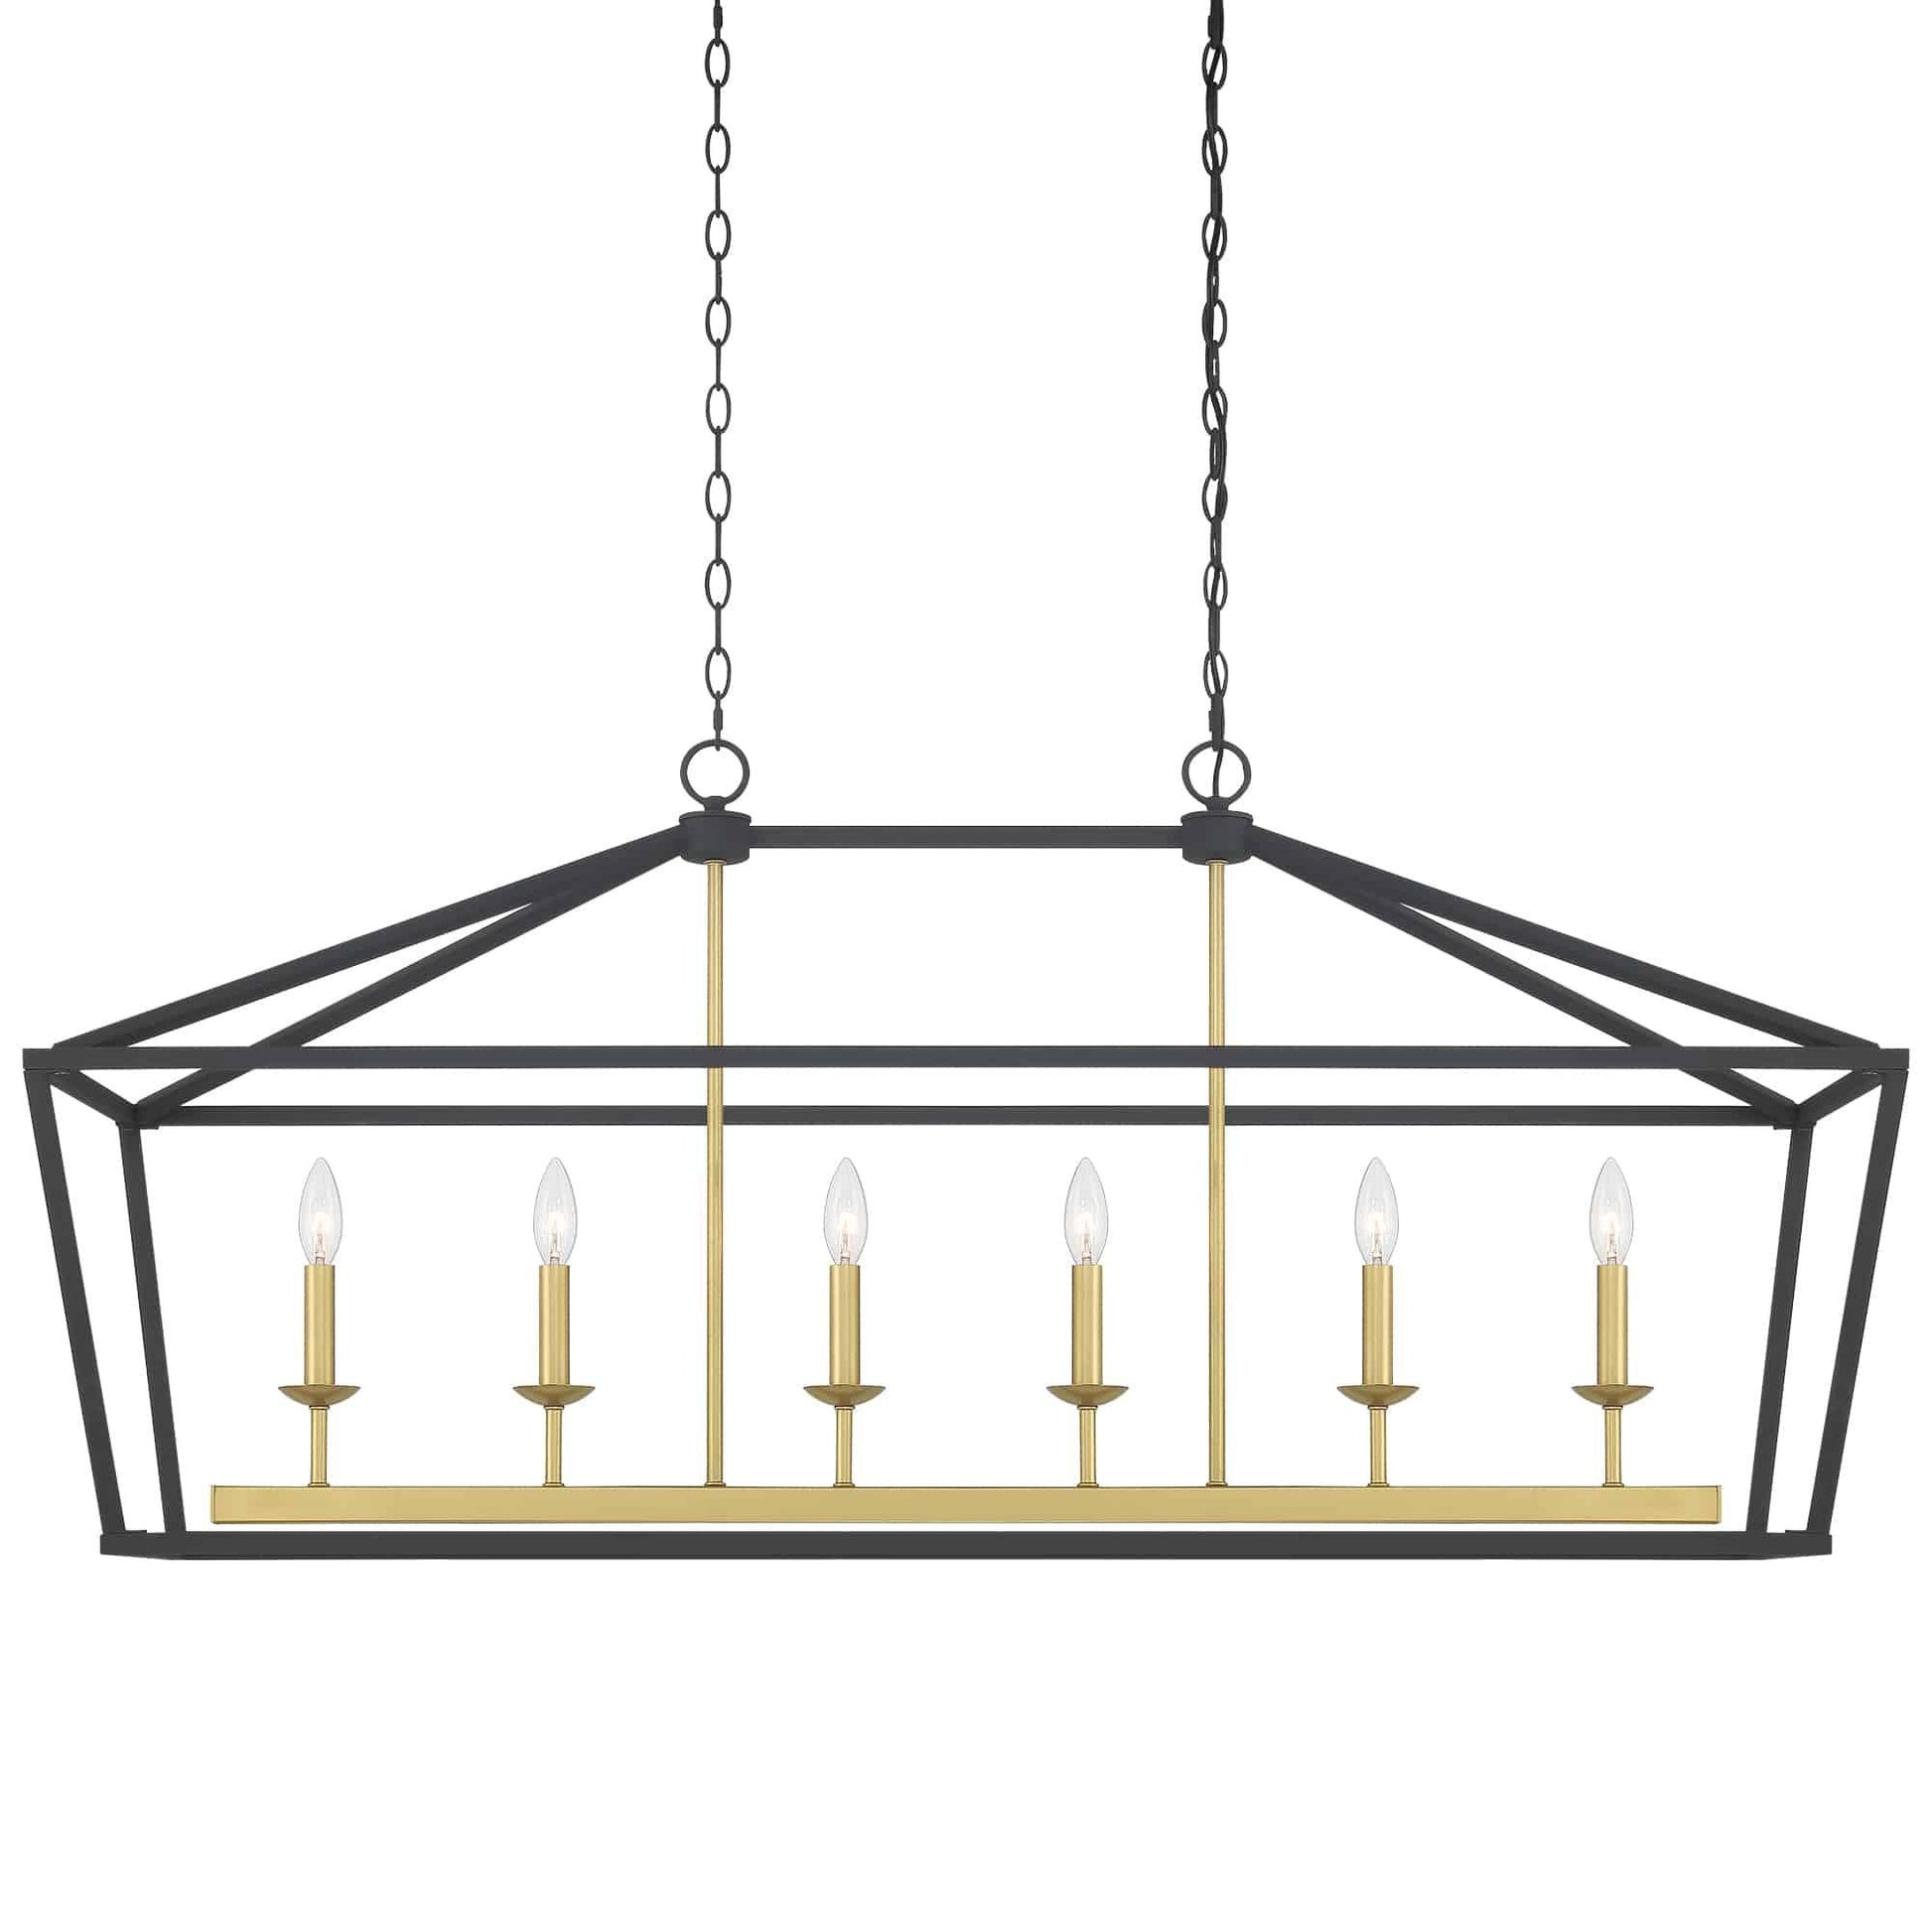 6306 | 6 - Light Kitchen Island Rectangle Chandelier by ACROMA™  UL - ACROMA